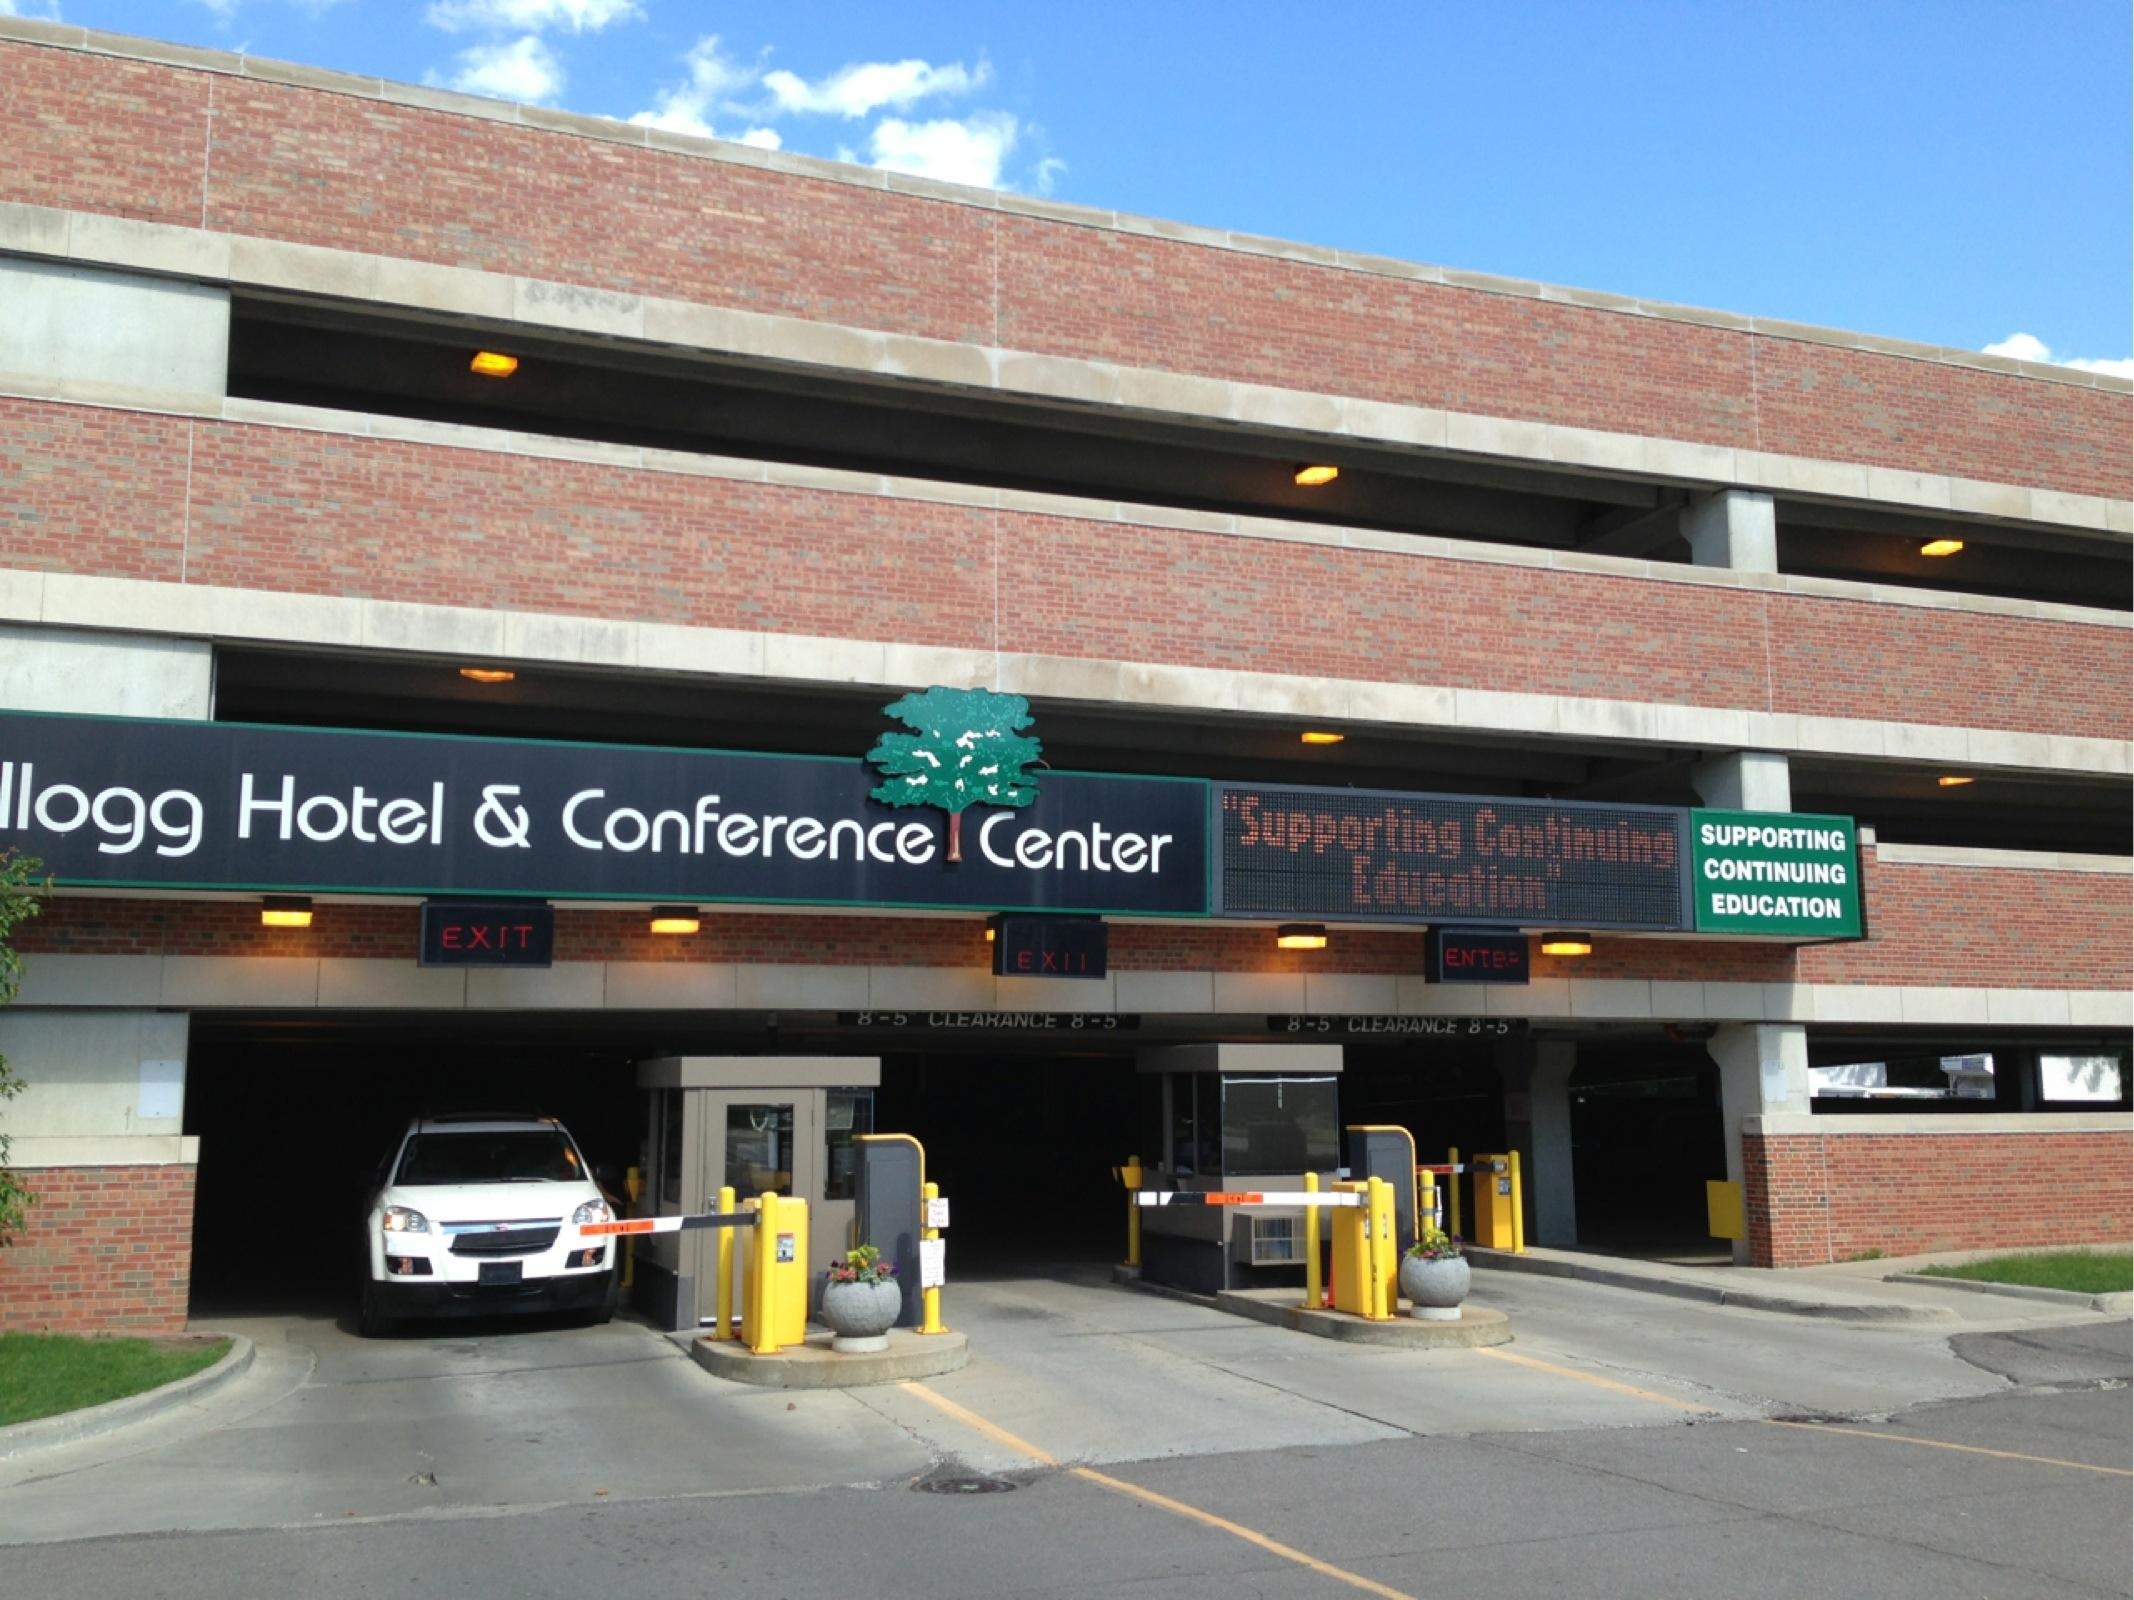 Kellogg Hotel and Conference Center - Parking in East Lansing | ParkMe